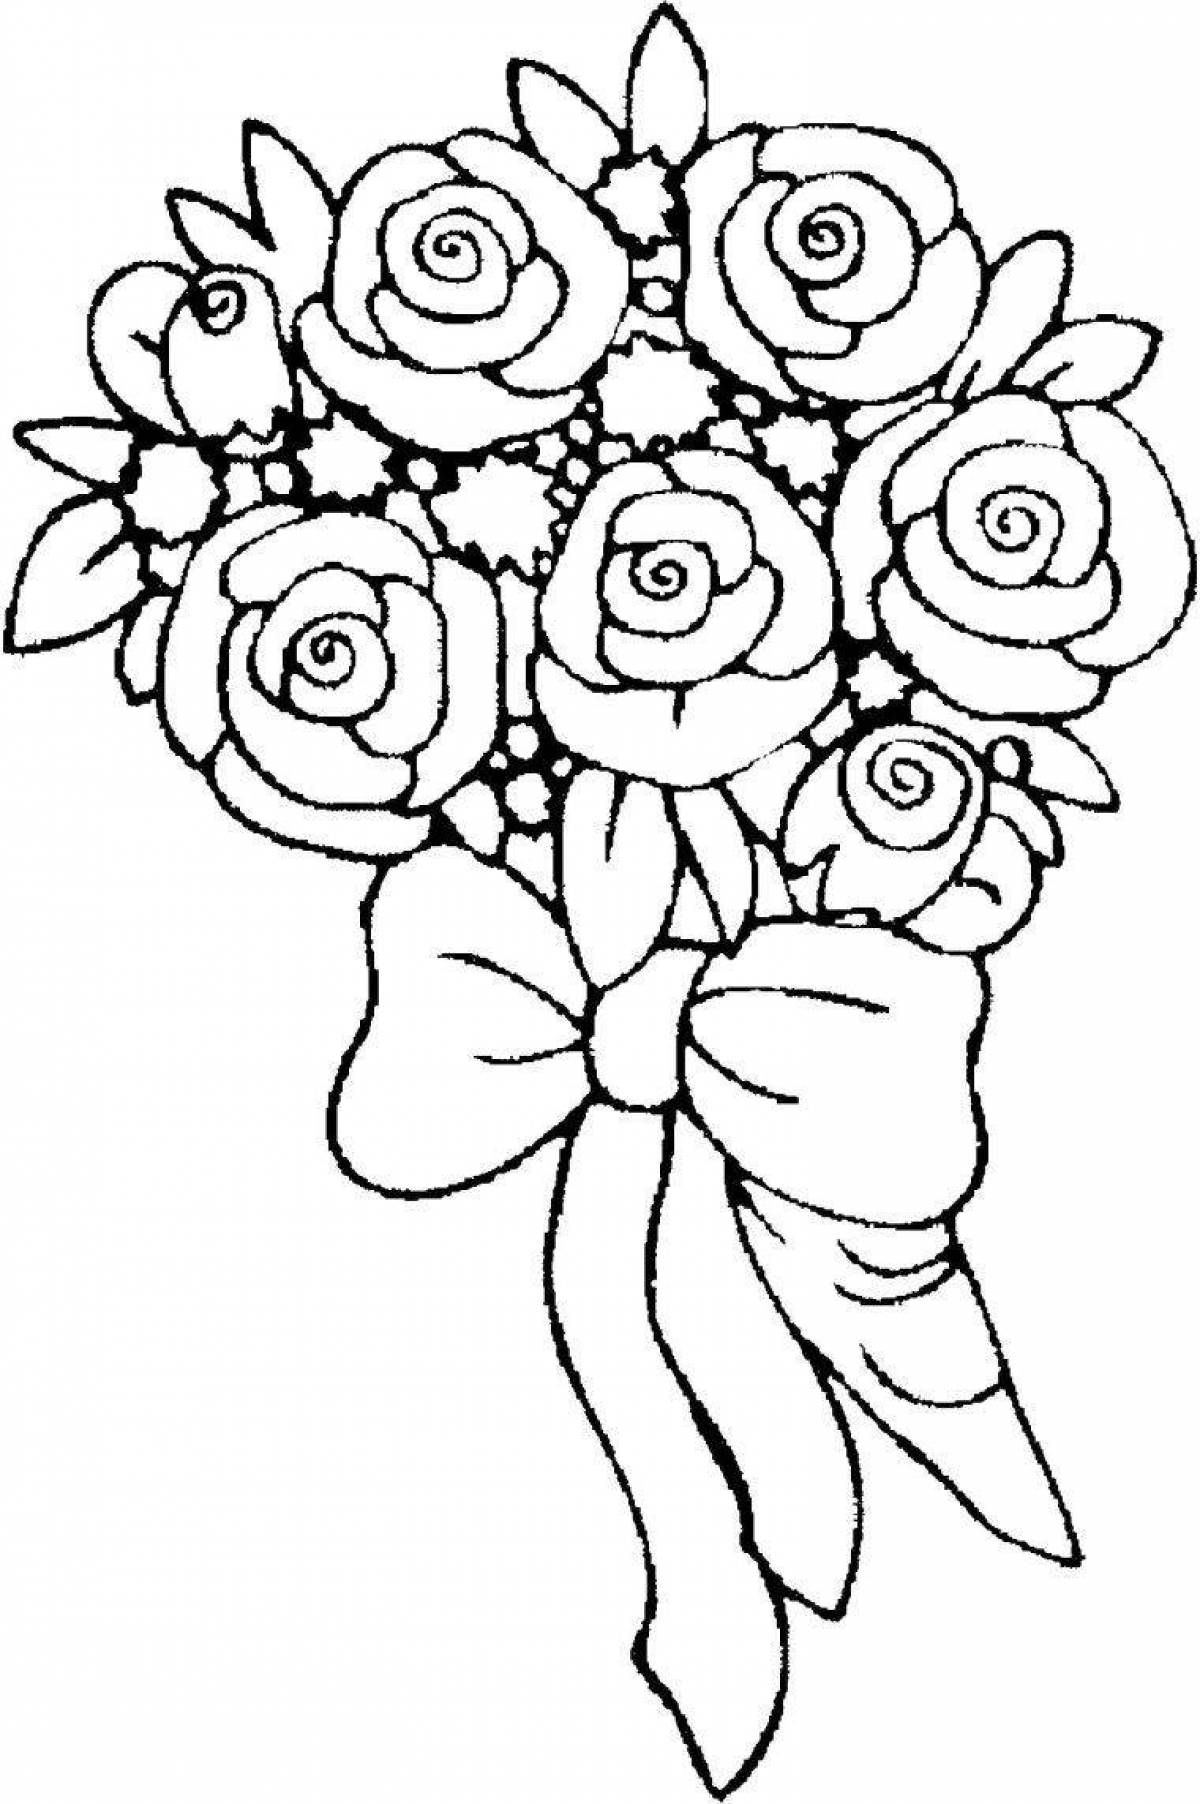 Coloring book peaceful bouquet of roses